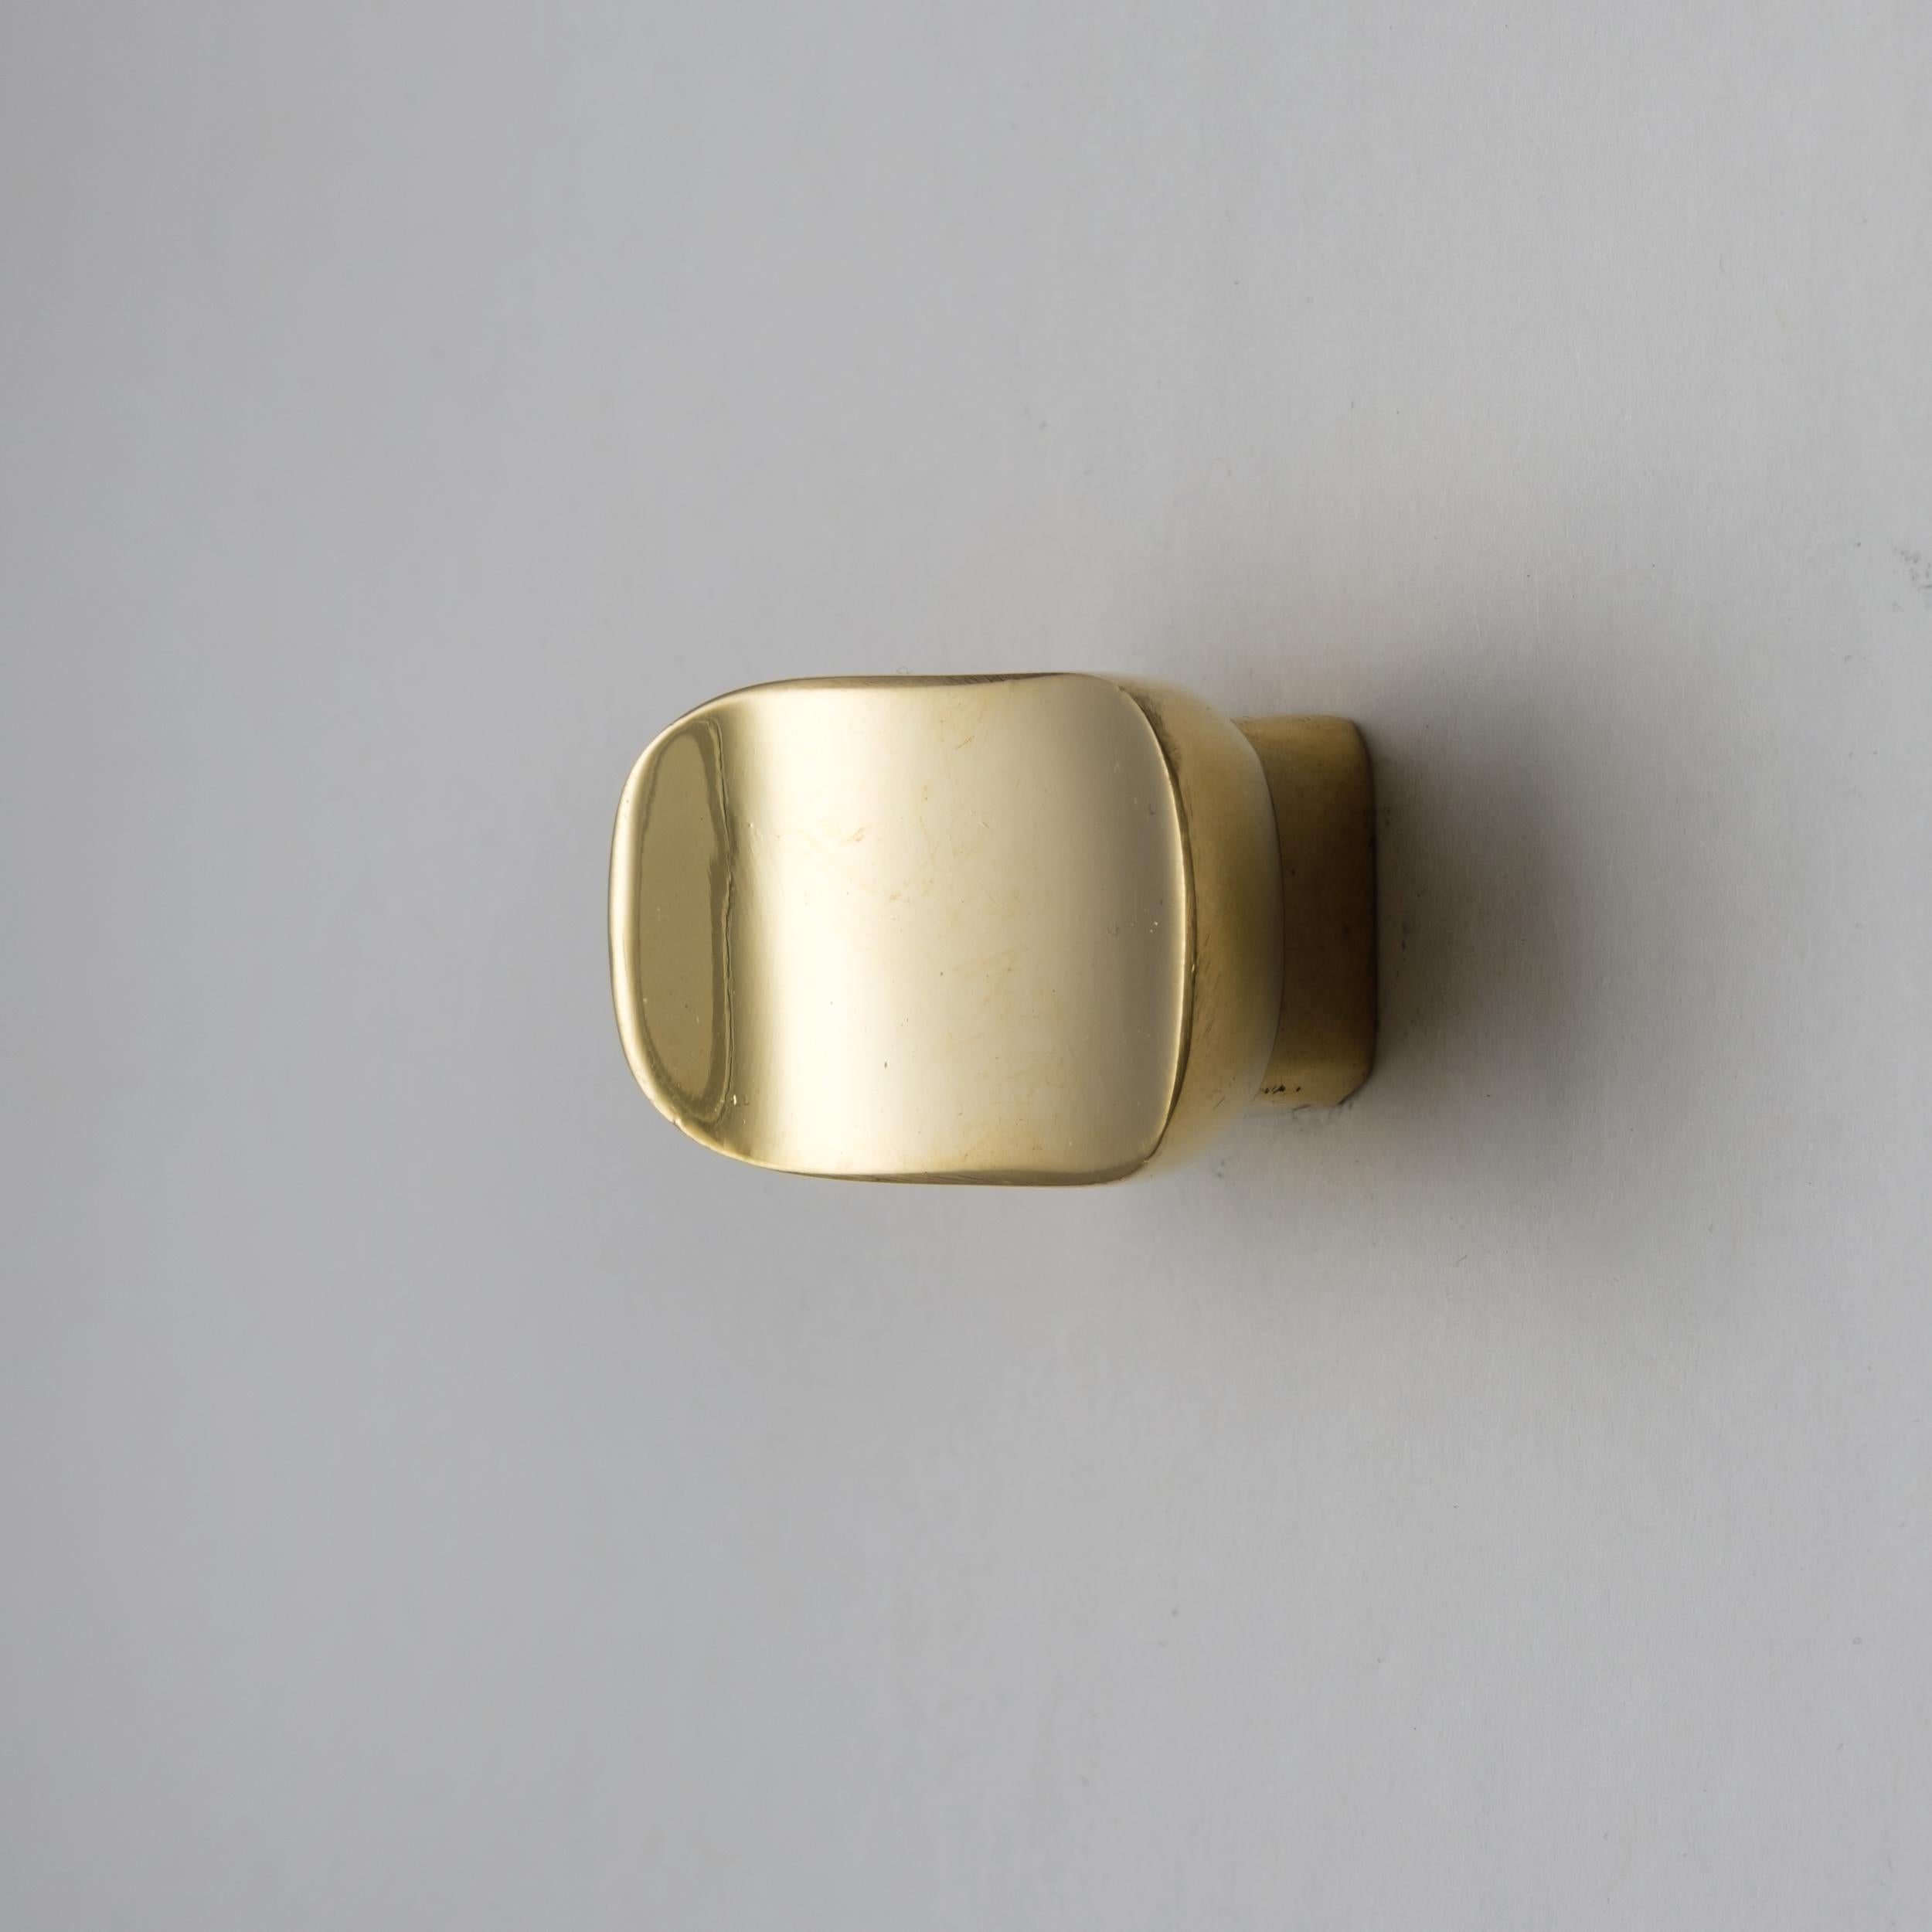 Carl Auböck Model #9038 polished brass knob.

Designed in the 1950s, this versatile and Minimalist Viennese knob is executed in polished brass by Werkstätte Carl Auböck, Austria. Its minimalist design combines clean form with